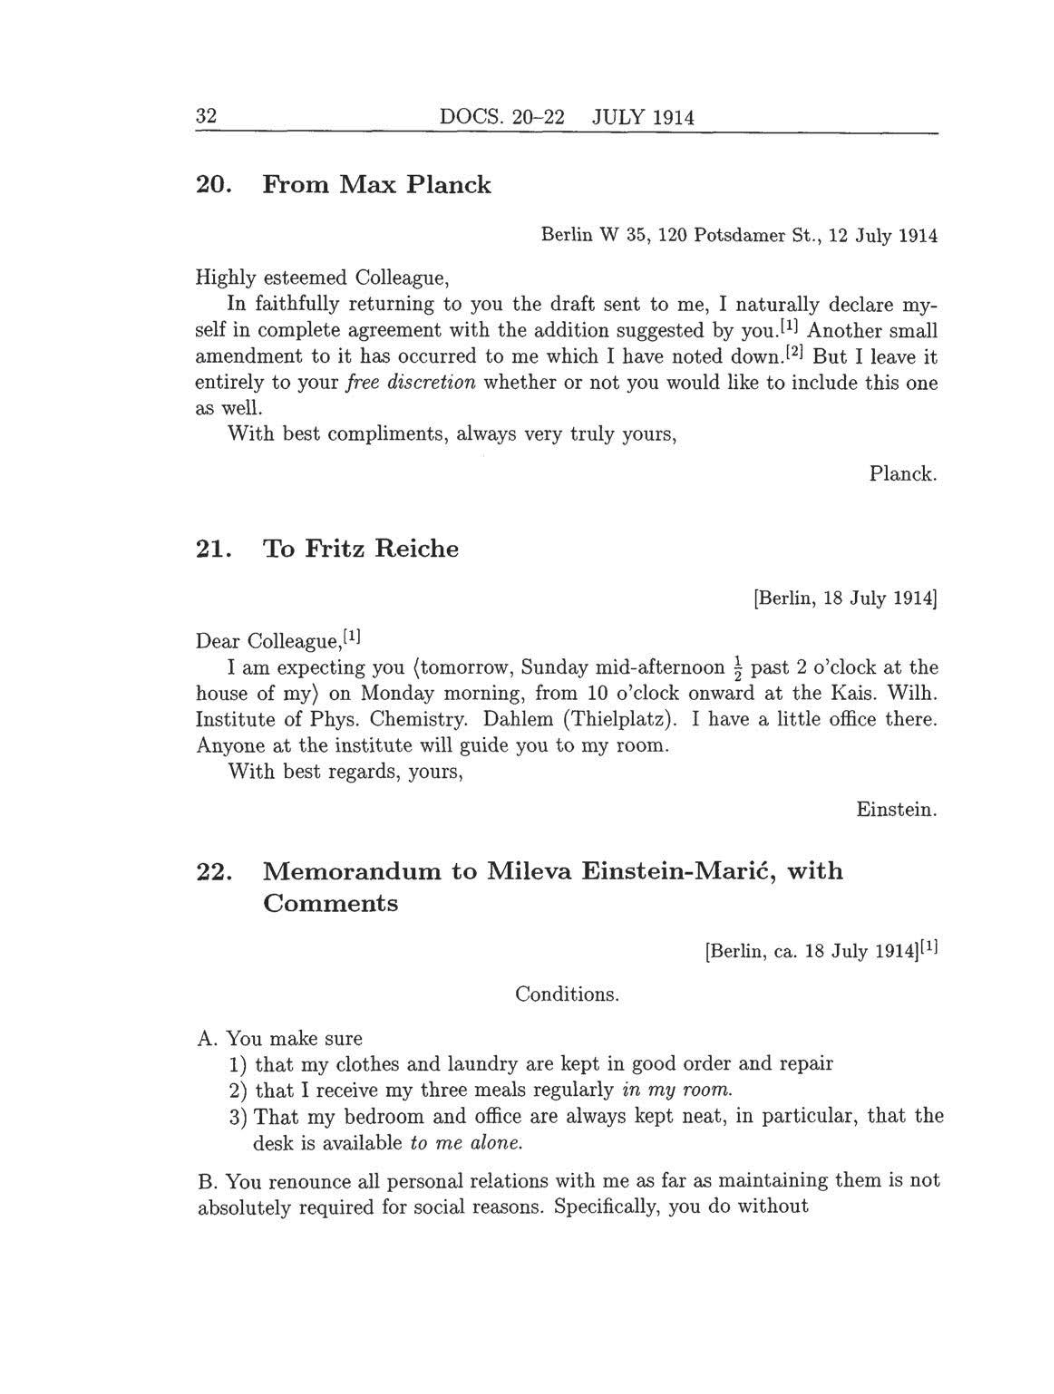 Volume 8: The Berlin Years: Correspondence, 1914-1918 (English translation supplement) page 32